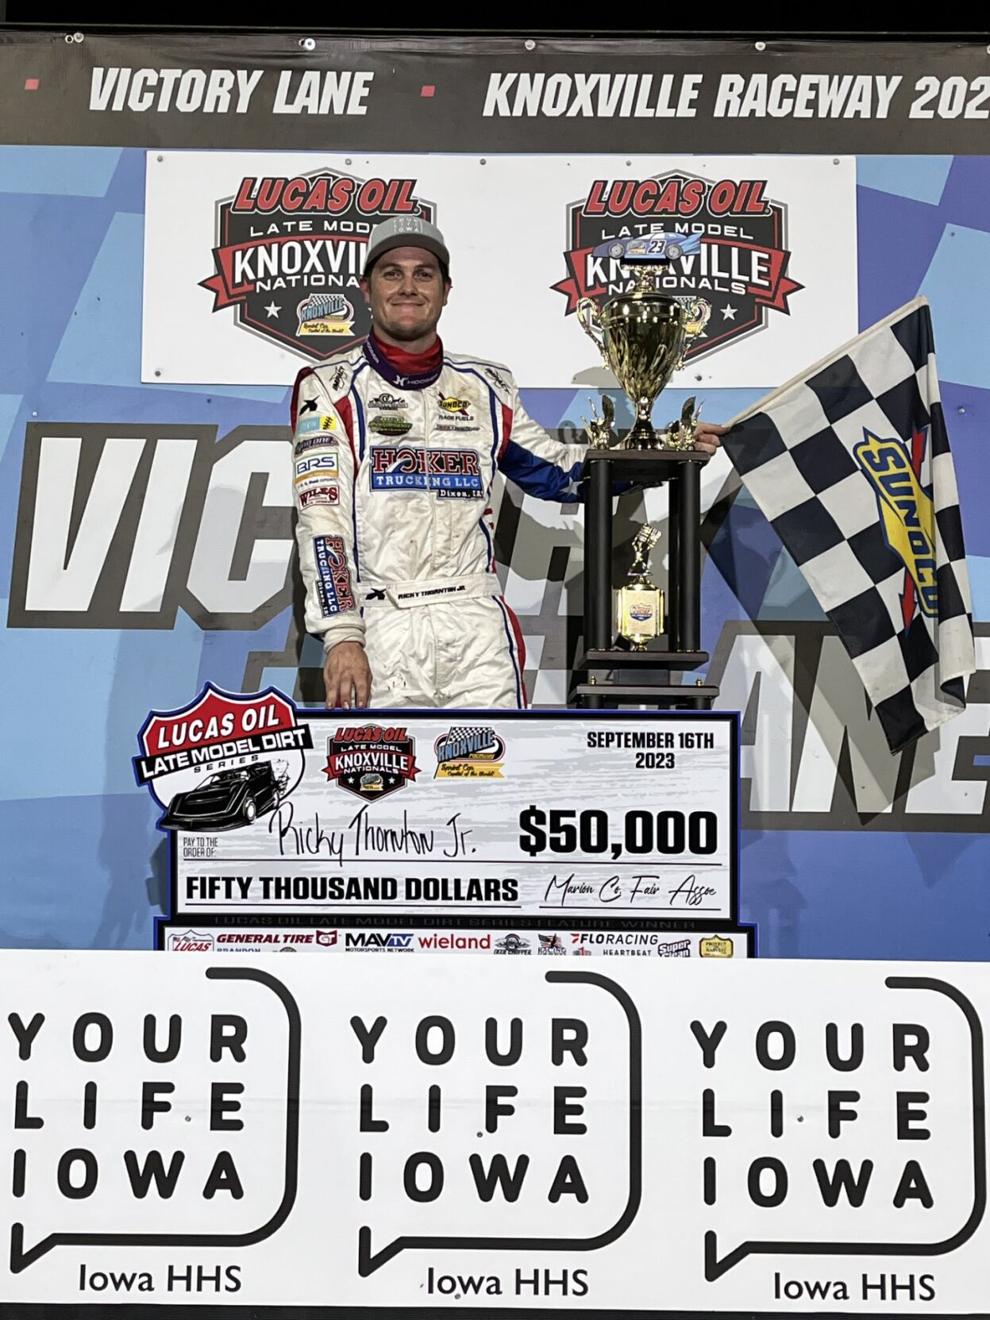 Ricky Thornton Jr. makes it a clean sweep with 50,000 Late Model